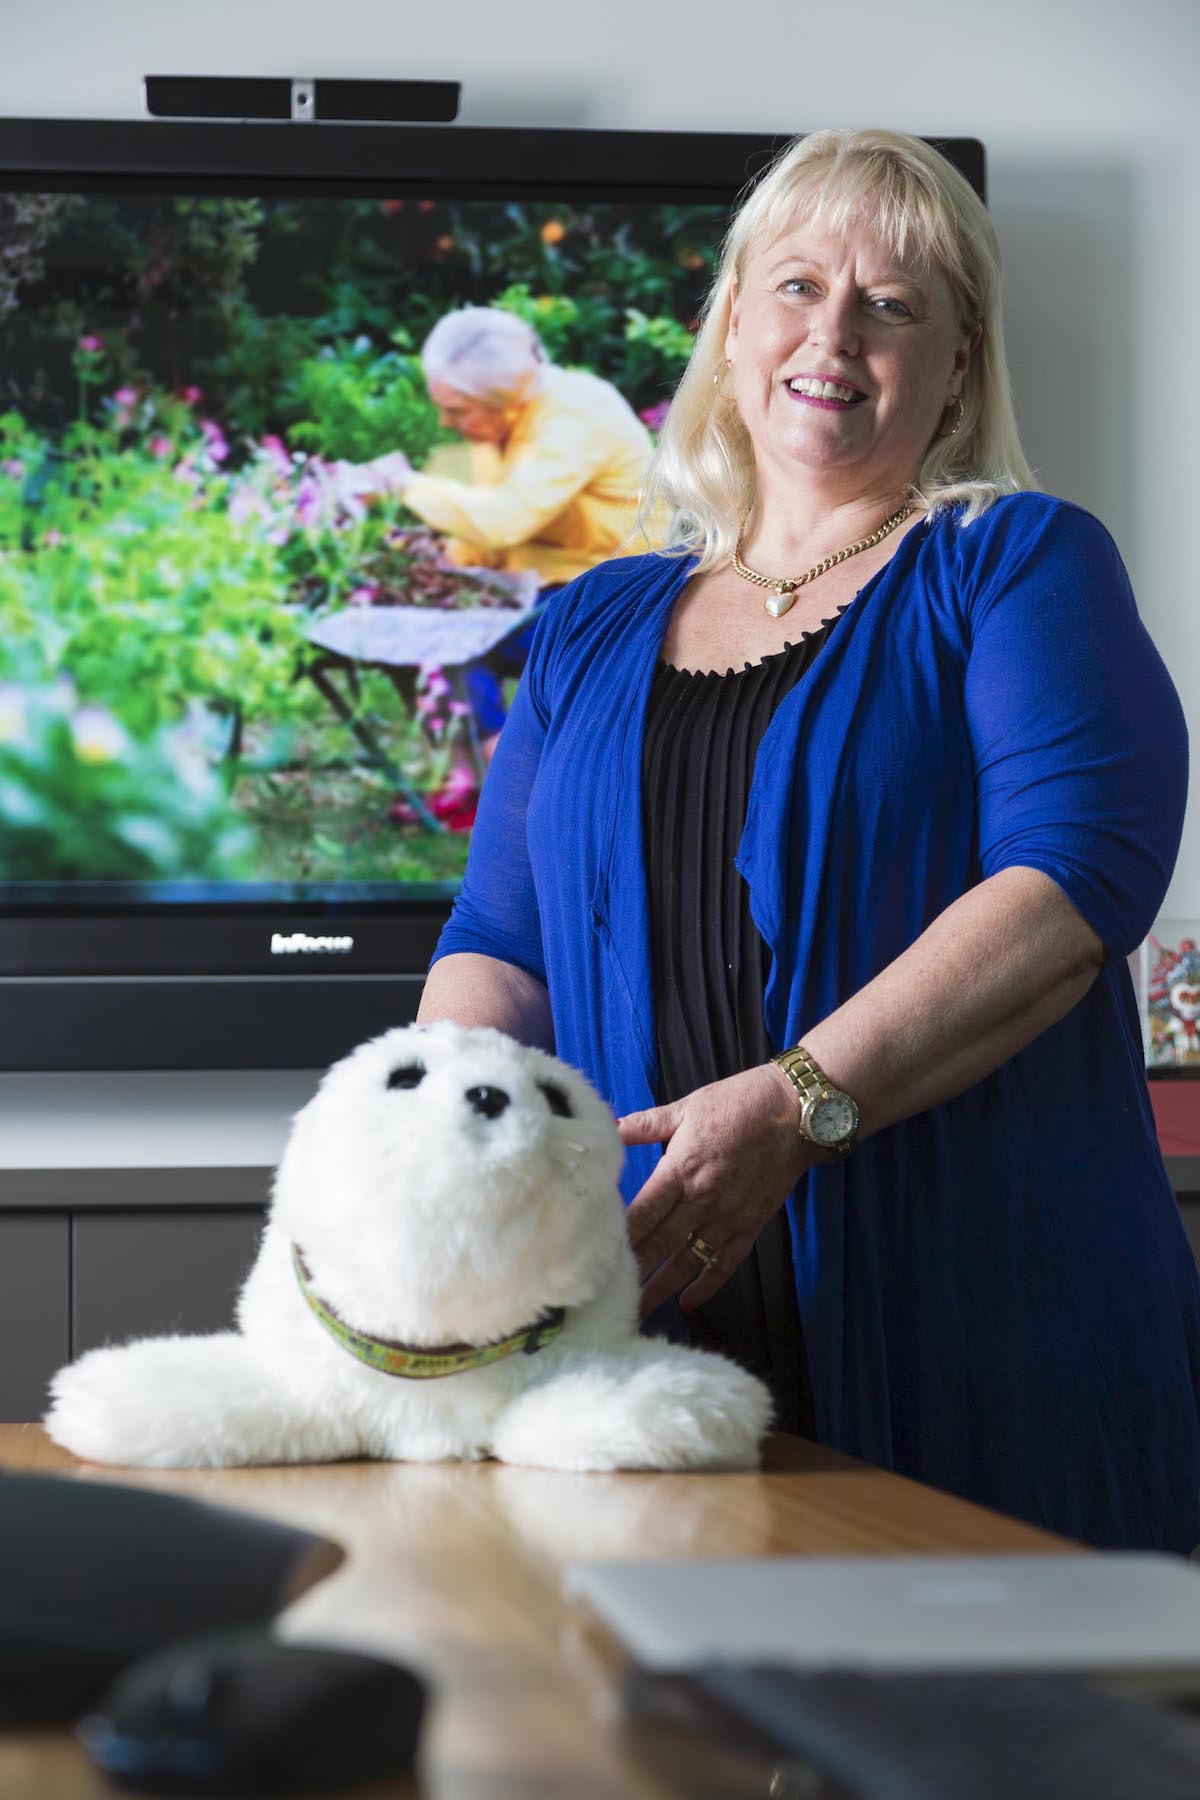 Professor Wendy Moyle with a PARO robot - one that looks and acts like a baby harp seal.